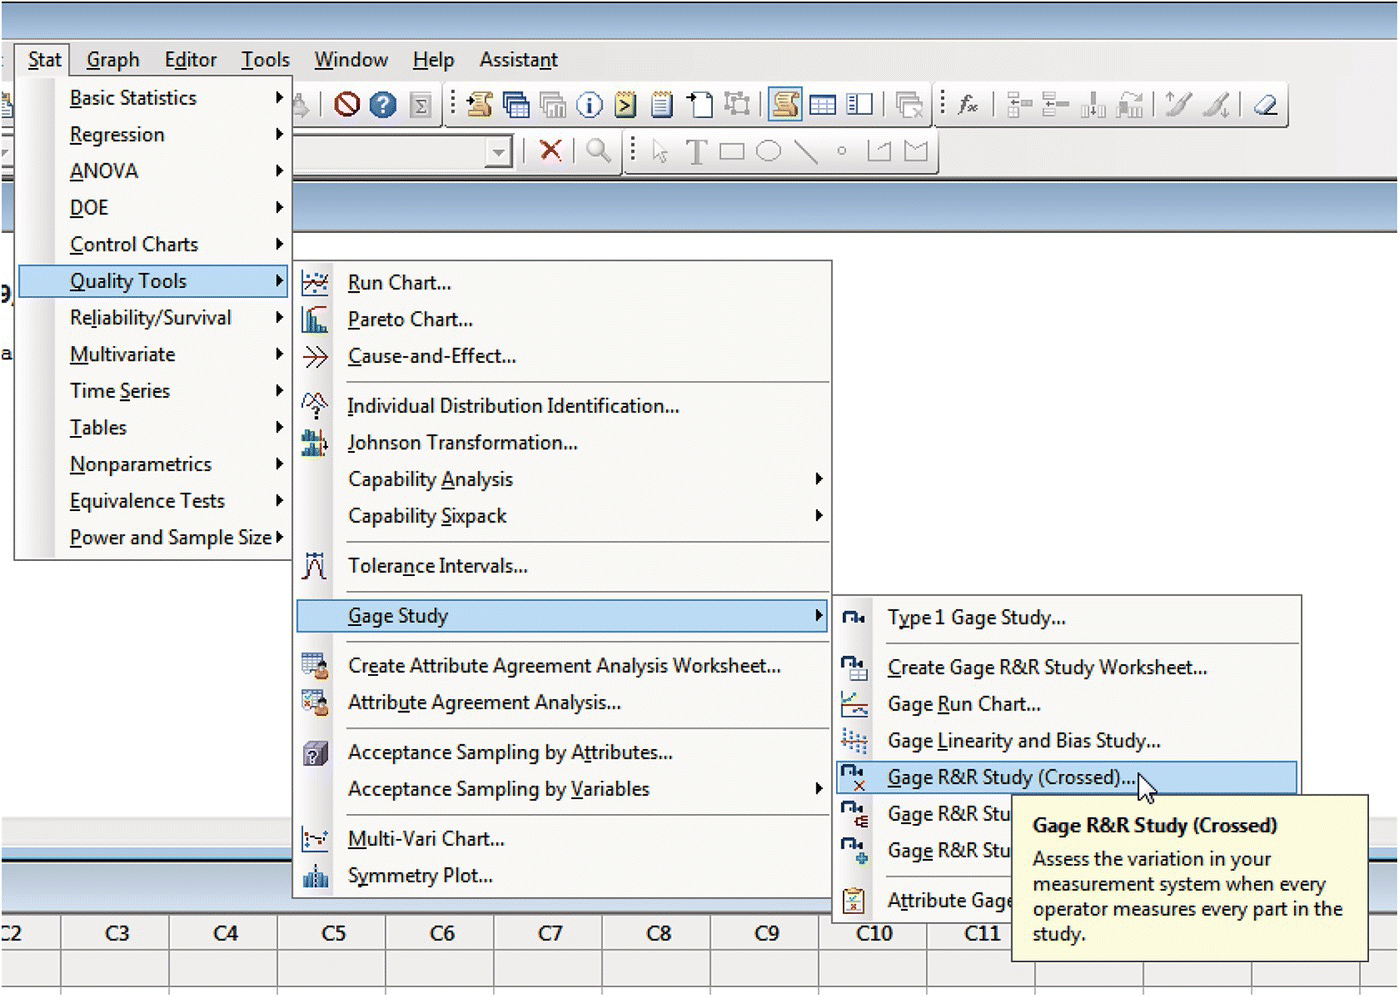 Screen capture of the Minitab window displaying a dropdown list for Quality Tools options to a dropdown list for Gage Study with Gage R&R Study (Crossed) selected.